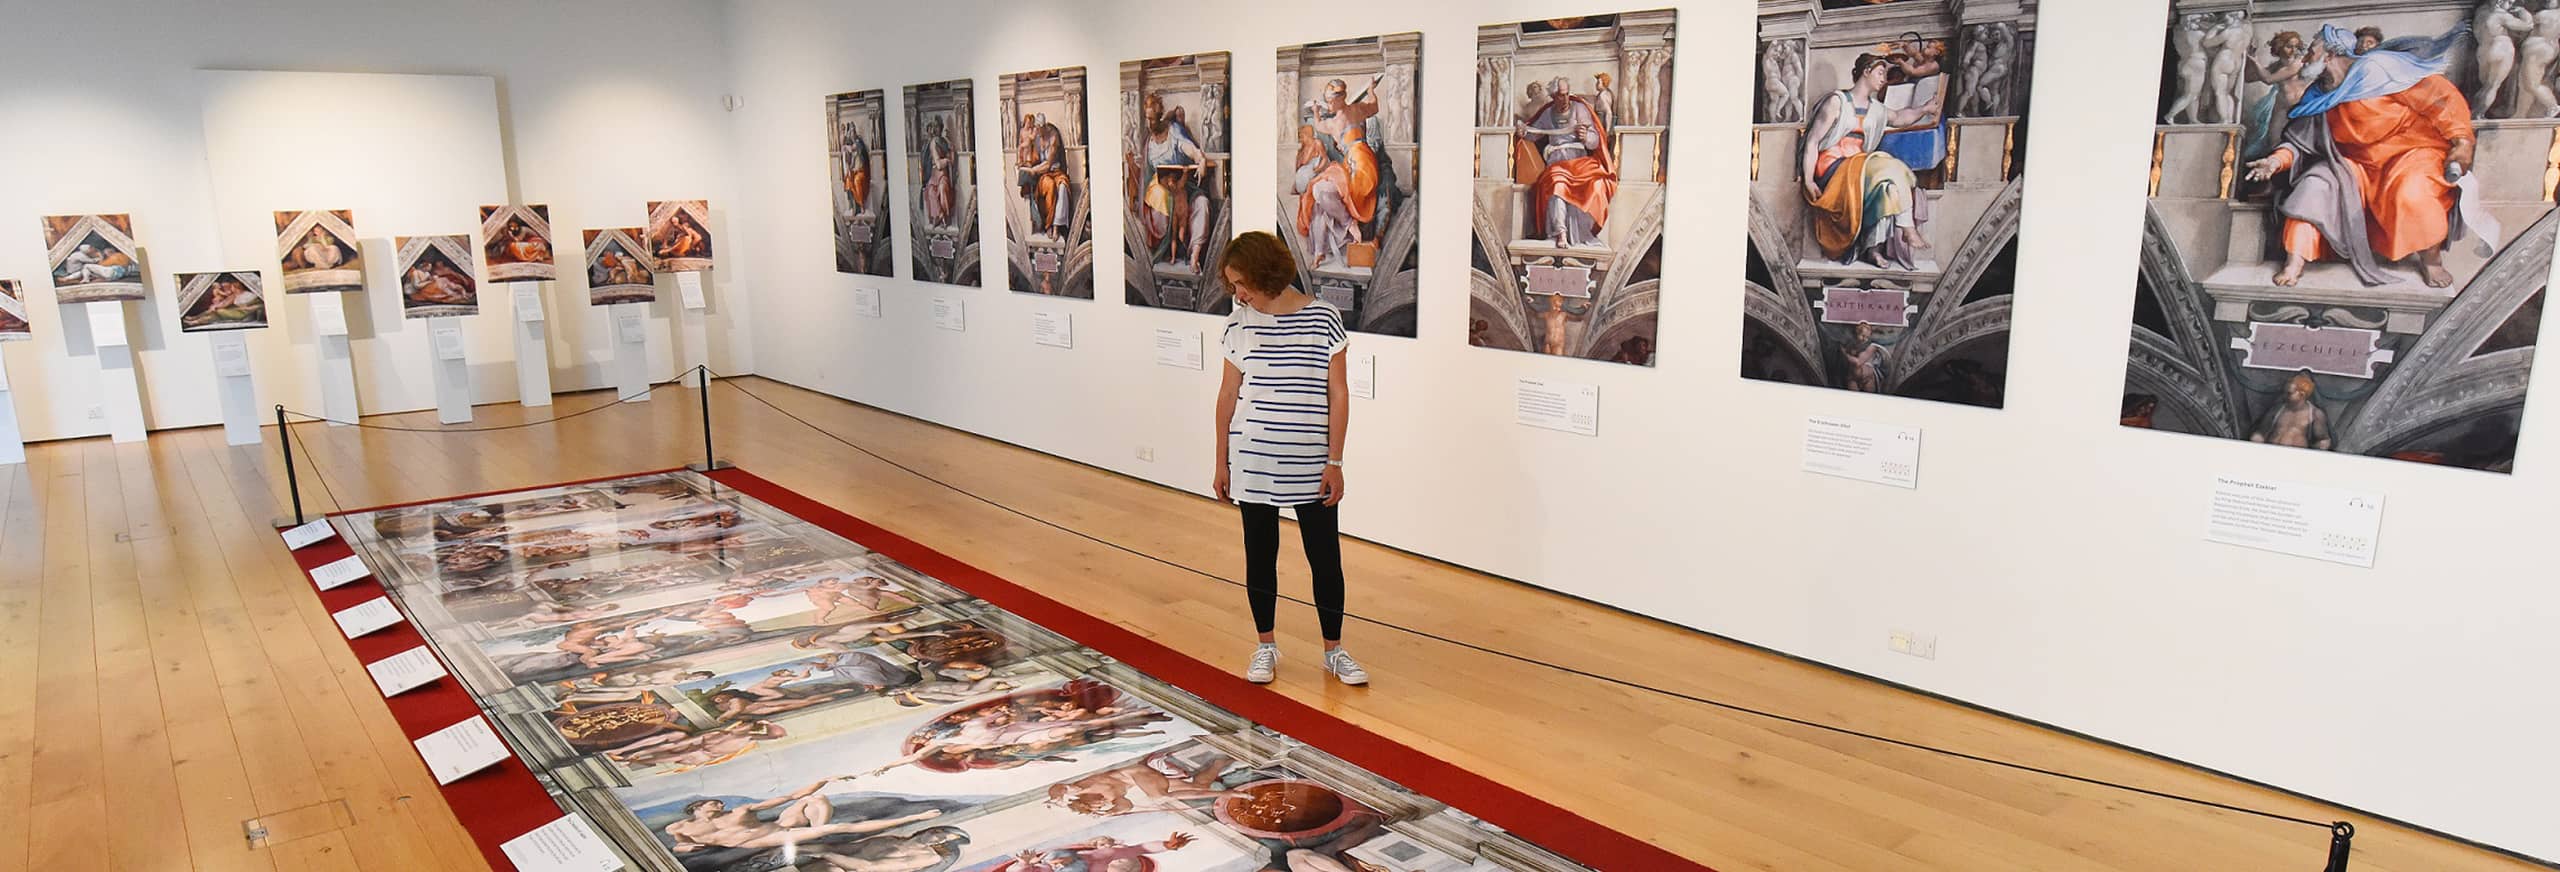 Leading local businesses are supporting the Sistine Chapel exhibition at Hull Minster, enabling church leaders to make it free to visitors. This picture shows part of the exhibition when it opened recently in Winchester. Picture: Solent News & Photo Agency.